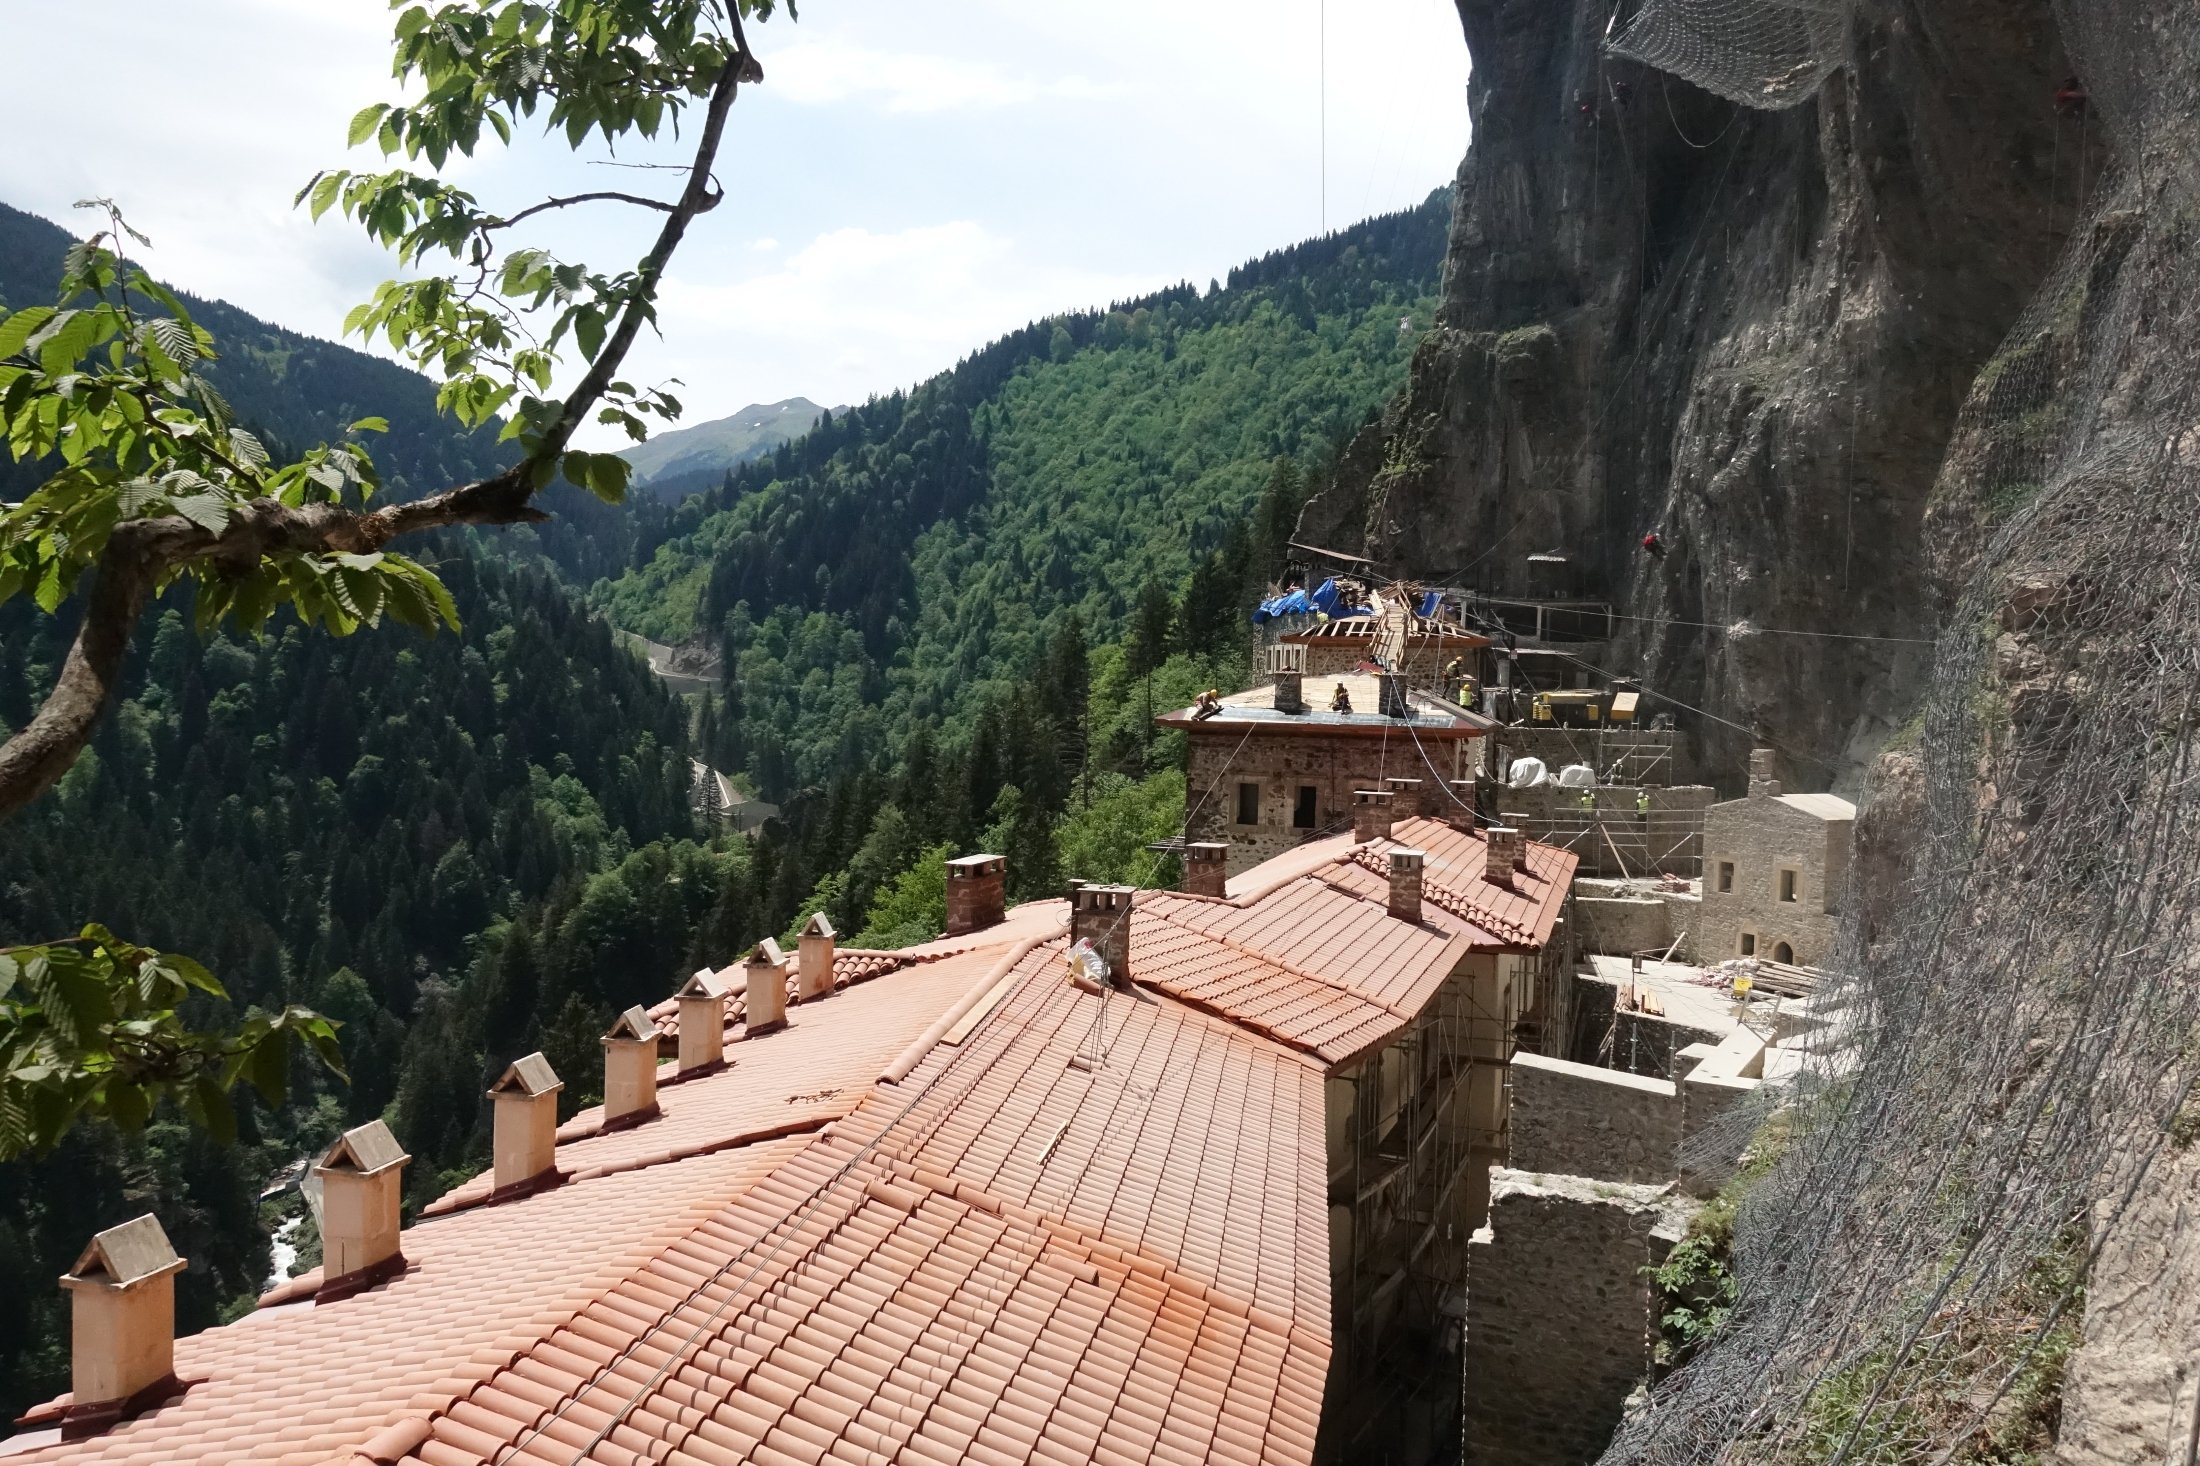 The Sümela Monastery can be seen 300 meters above the valley on the side of a mountain in Trabzon, Turkey, May 30, 2021. (AA Photo)